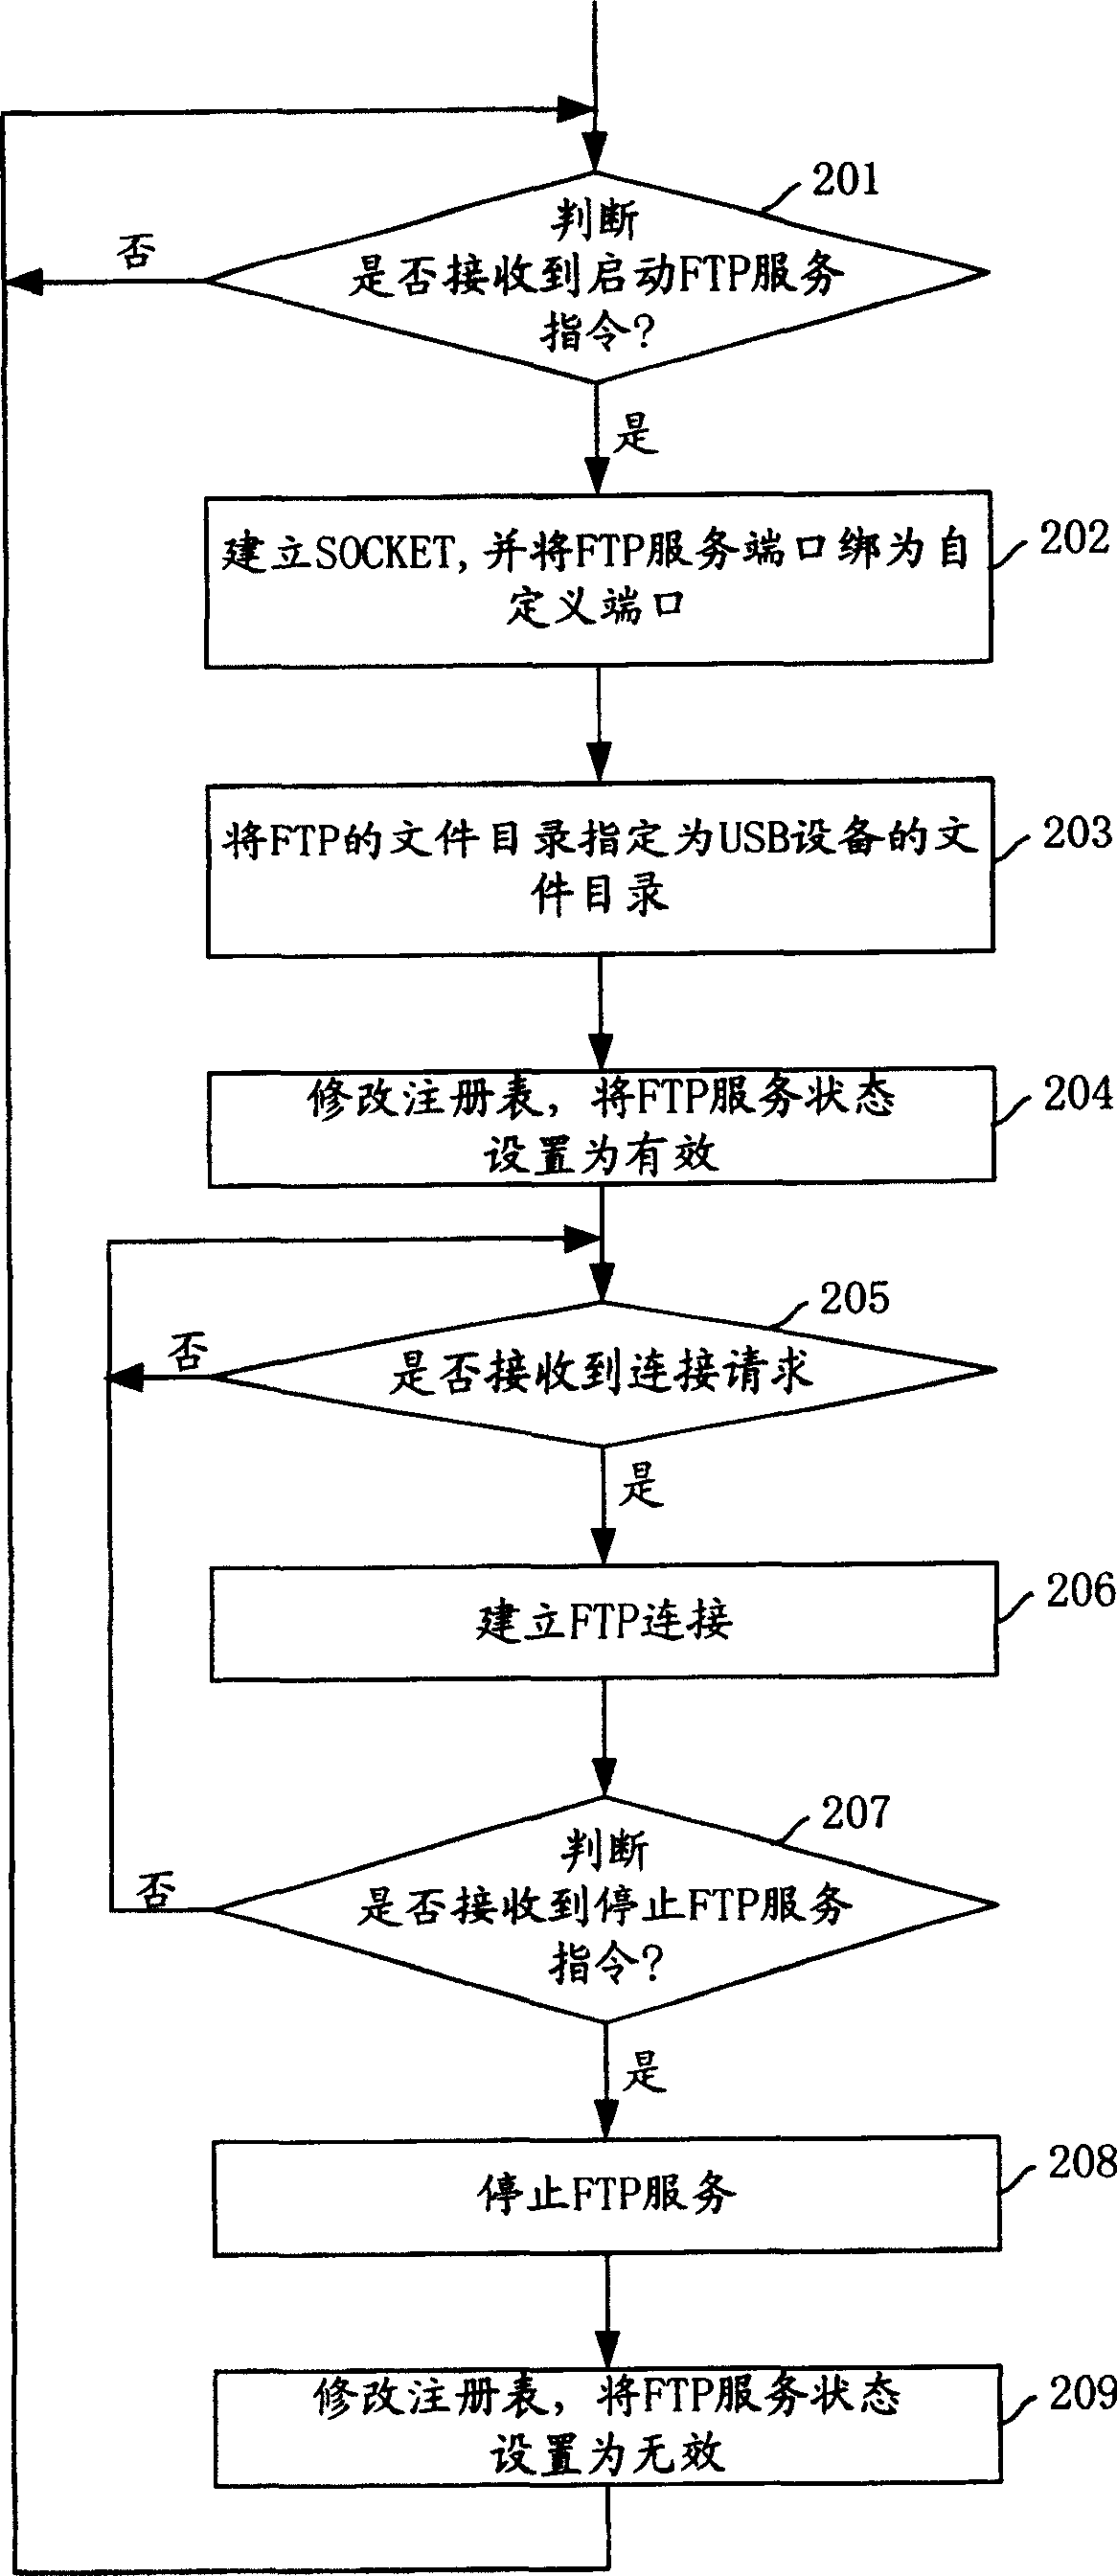 Mapping method for USB apparatus with storage function on network computer